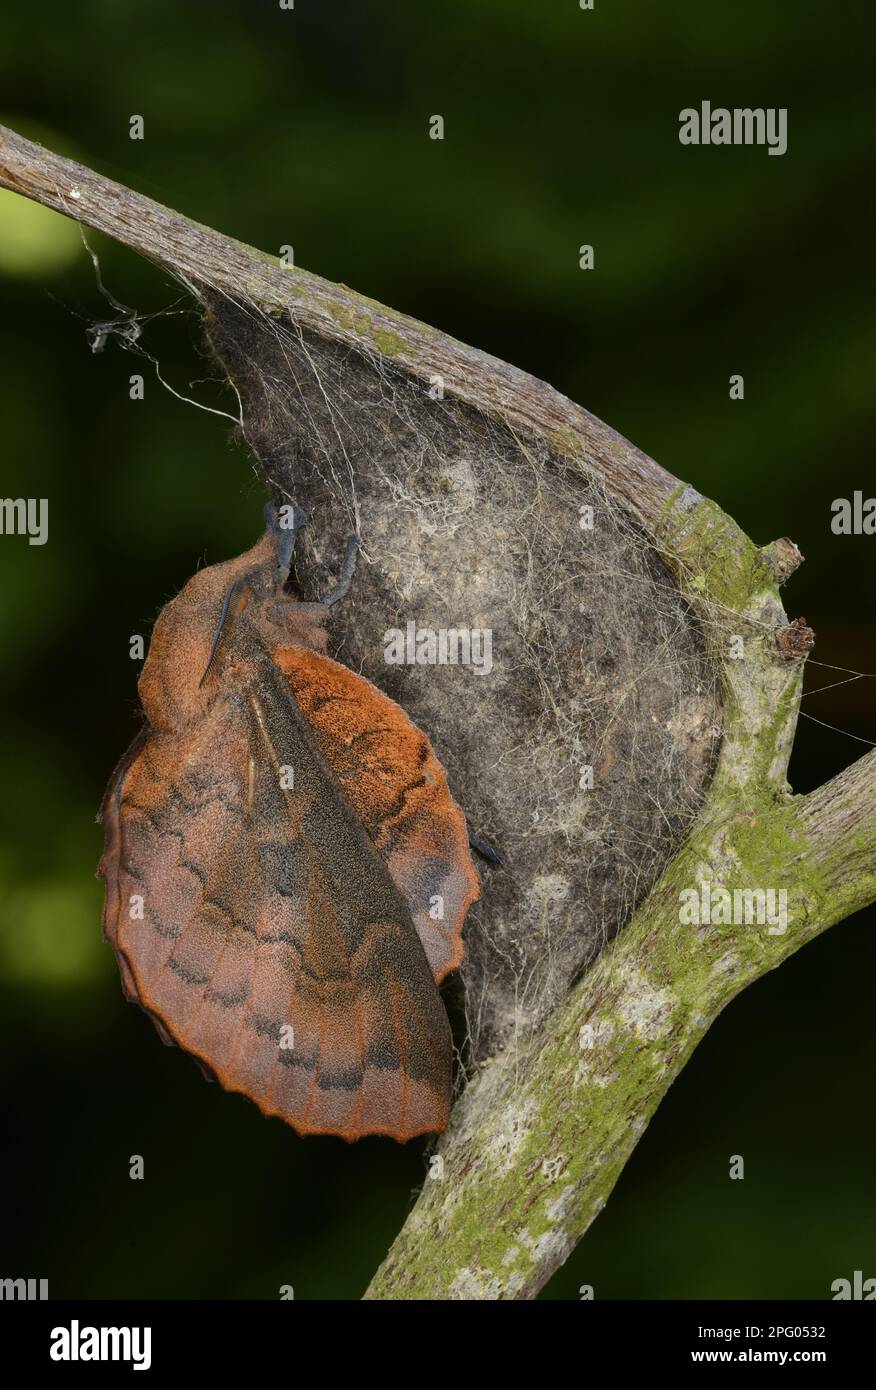 Lappet (Gastropacha quercifolia) Moth newly emerged adult, resting on cocoon attached to hawthorn twig, Oxfordshire, England, United Kingdom Stock Photo